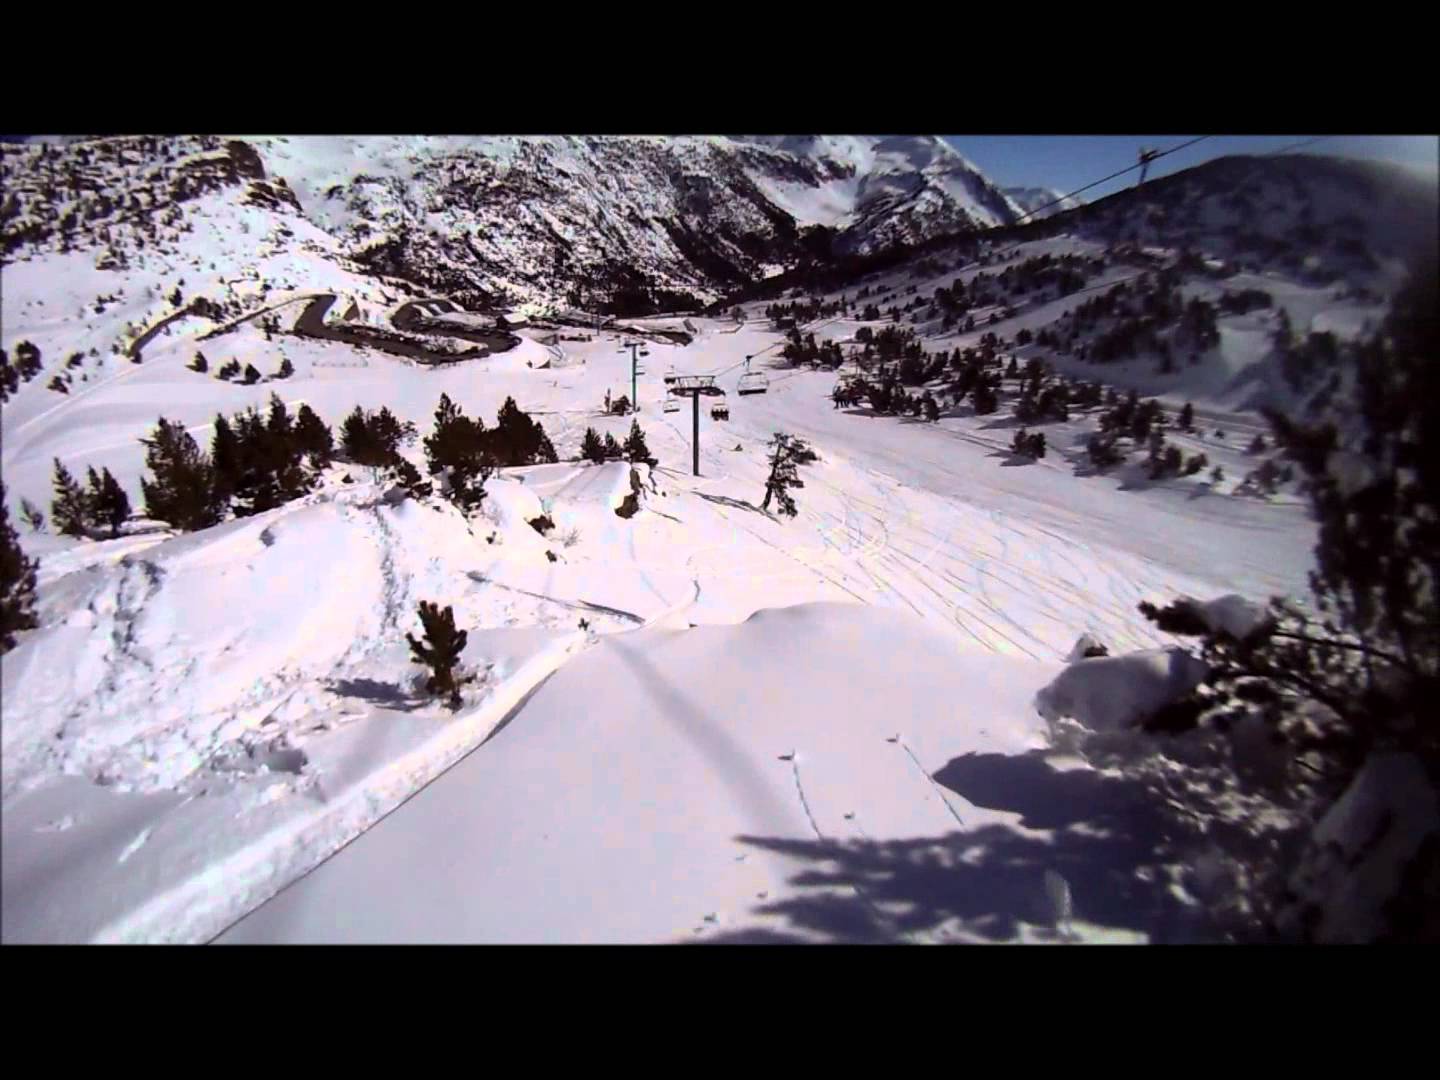 Arcalis, Vallnord - March 24th 2012